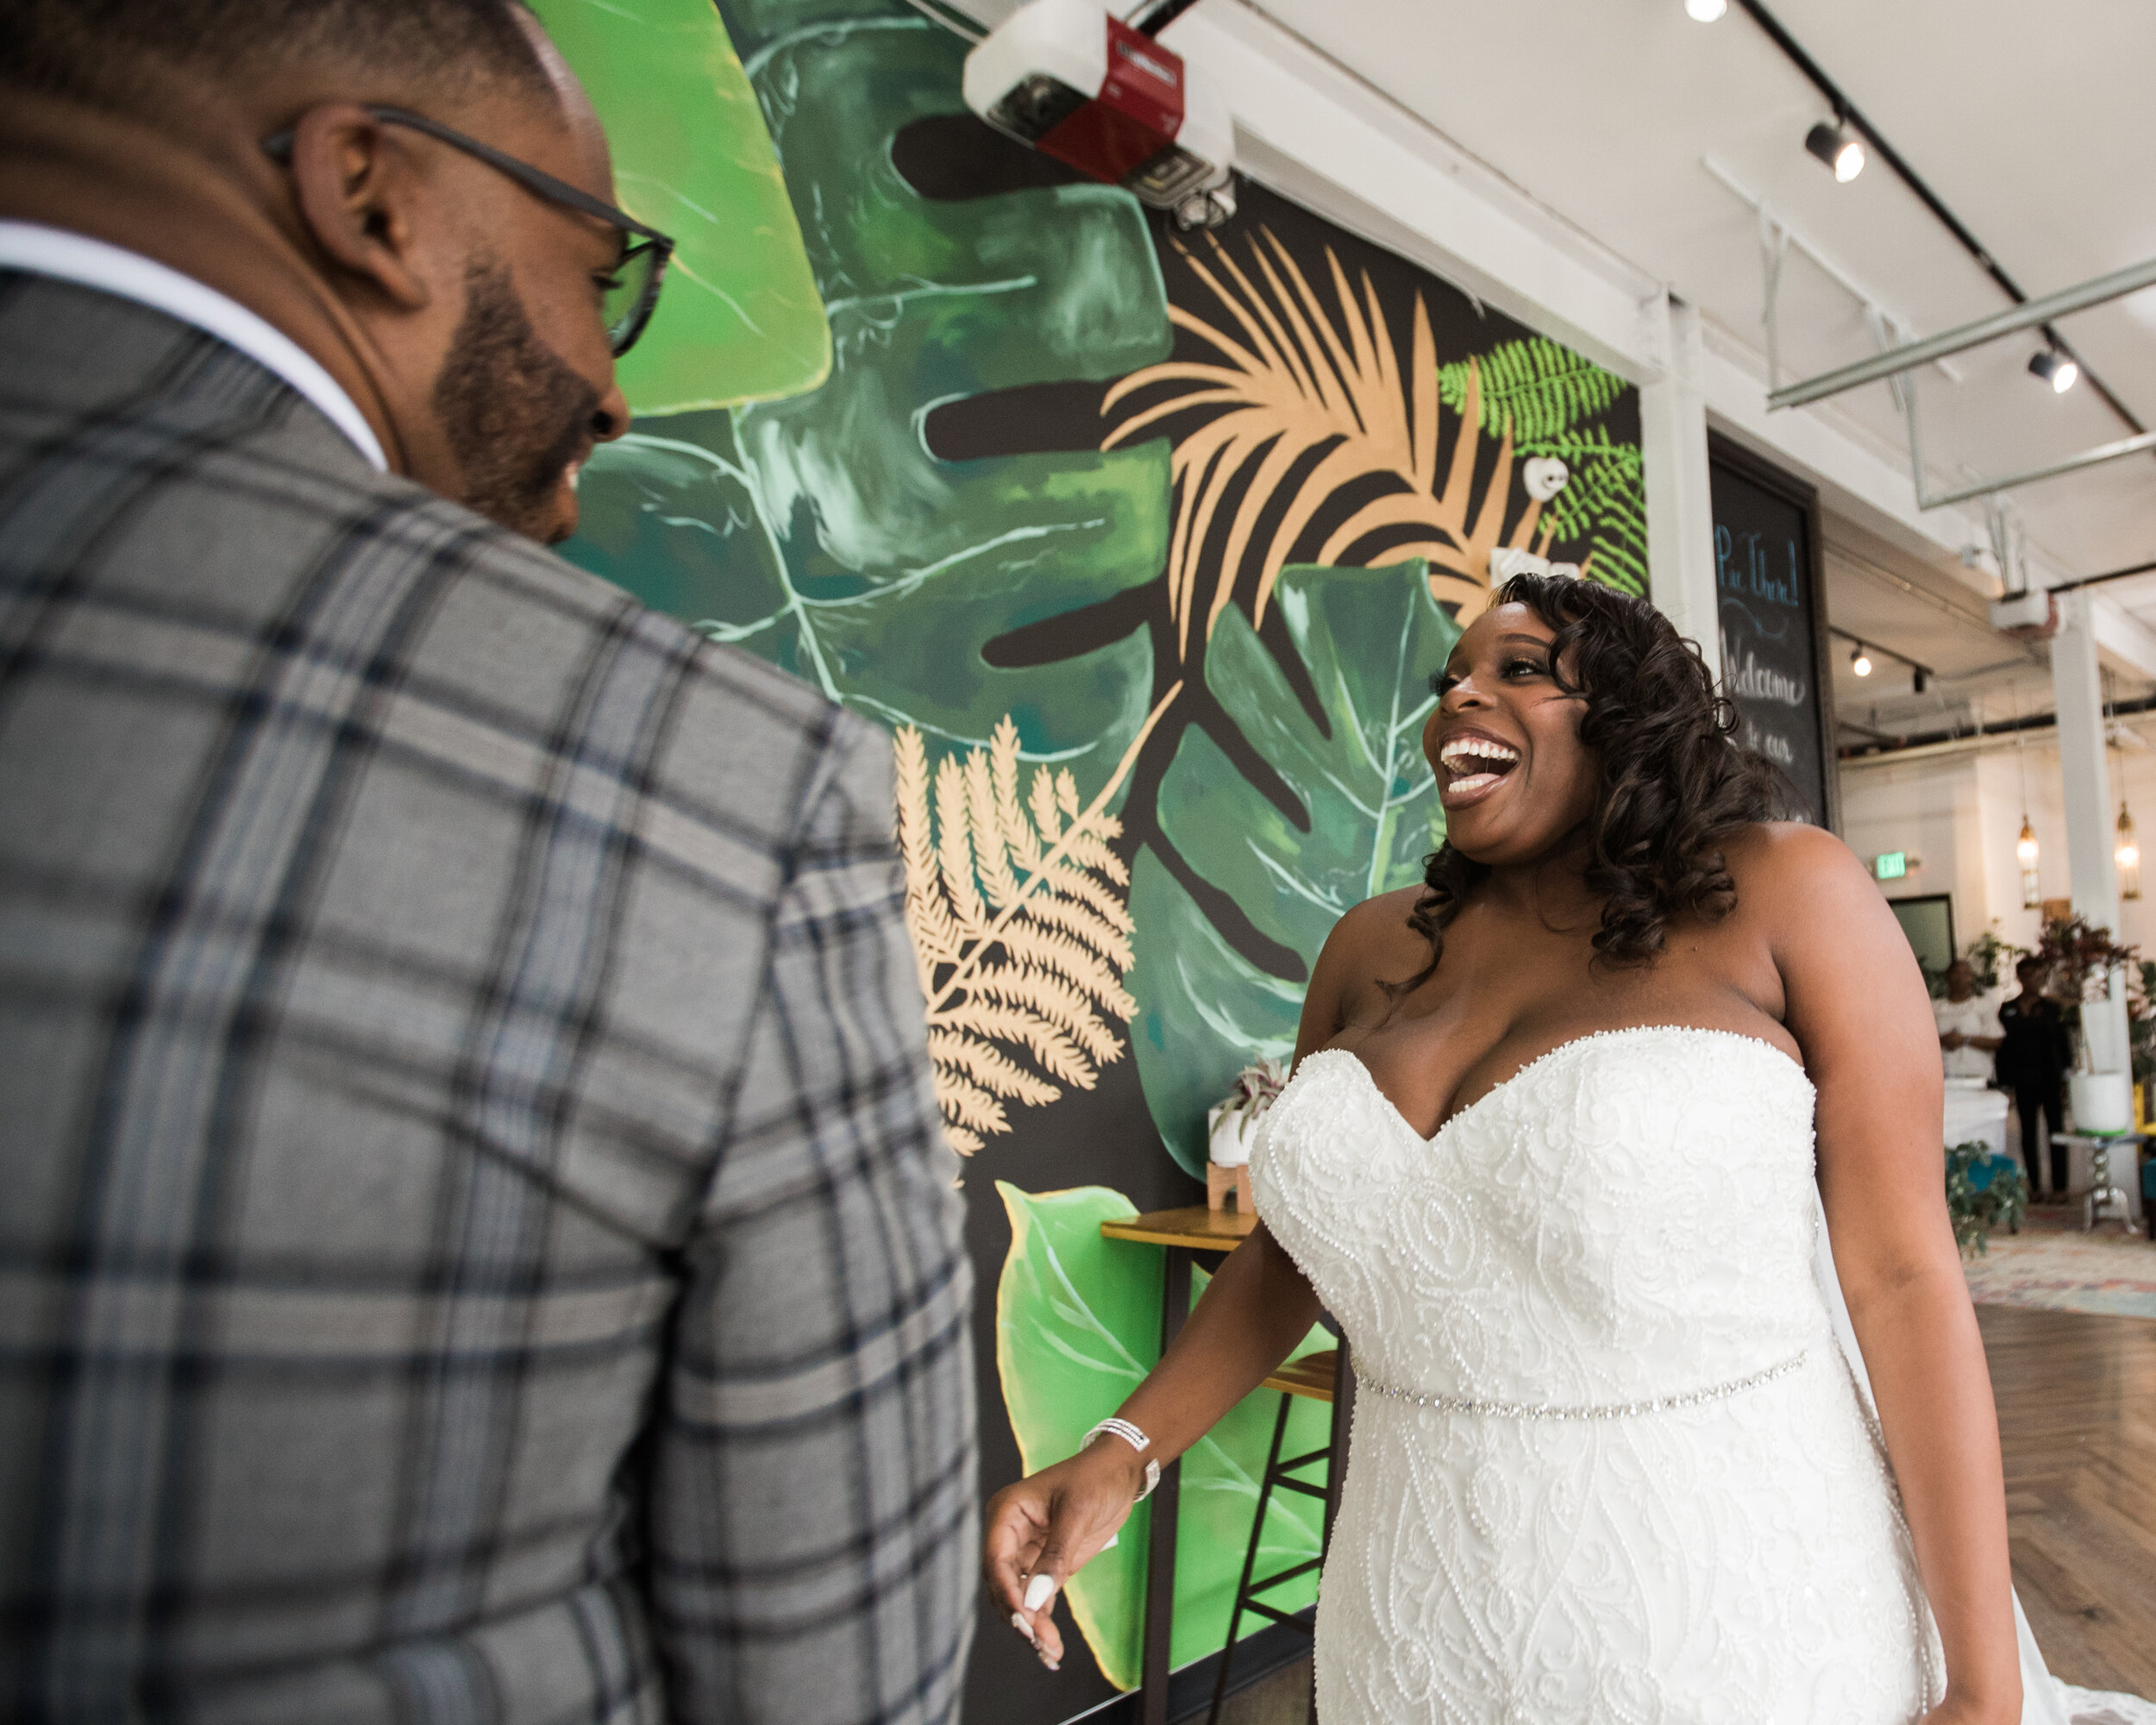 Silver and Black Wedding at Habitat at Seya in Baltimore City MAryland Husband and wife wedding photographers Megapixels Media Photography Curvy Bride (21 of 79).jpg